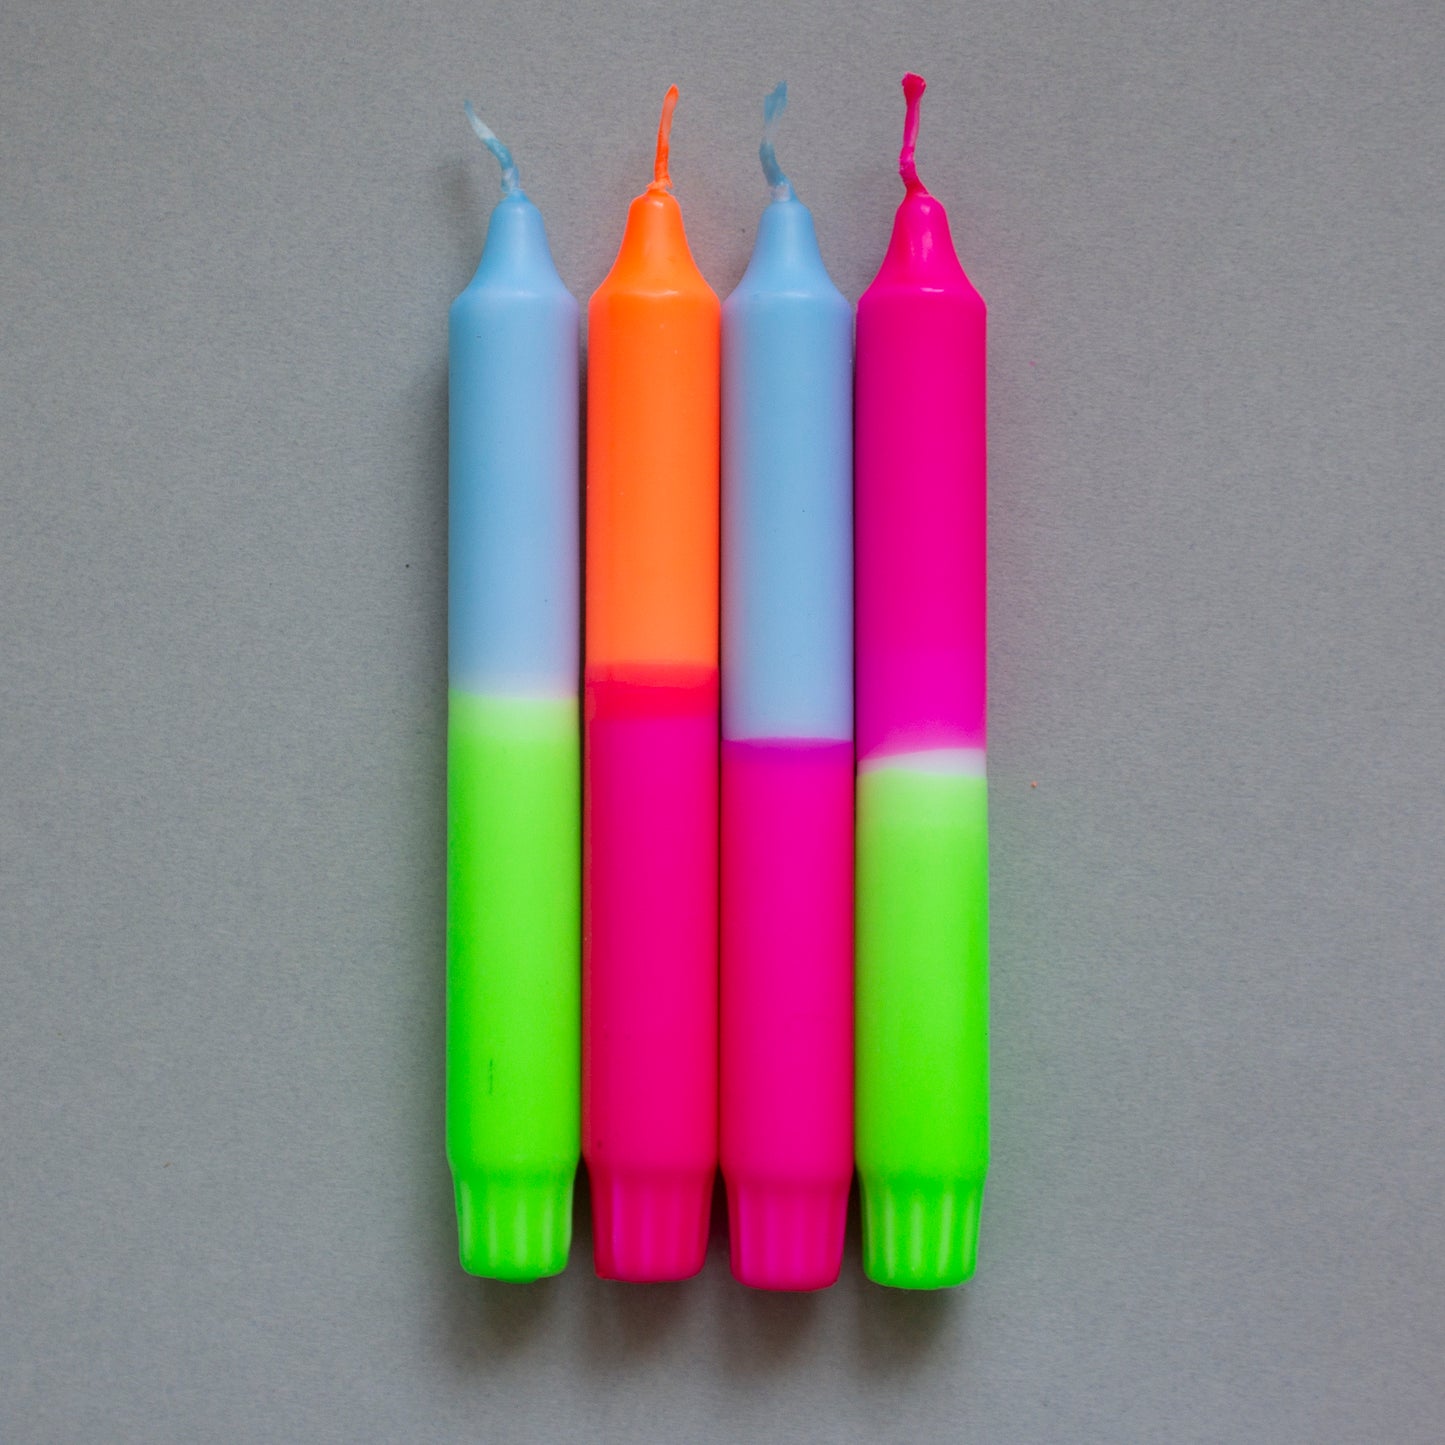 1 BICOLOR NEON CANDLE